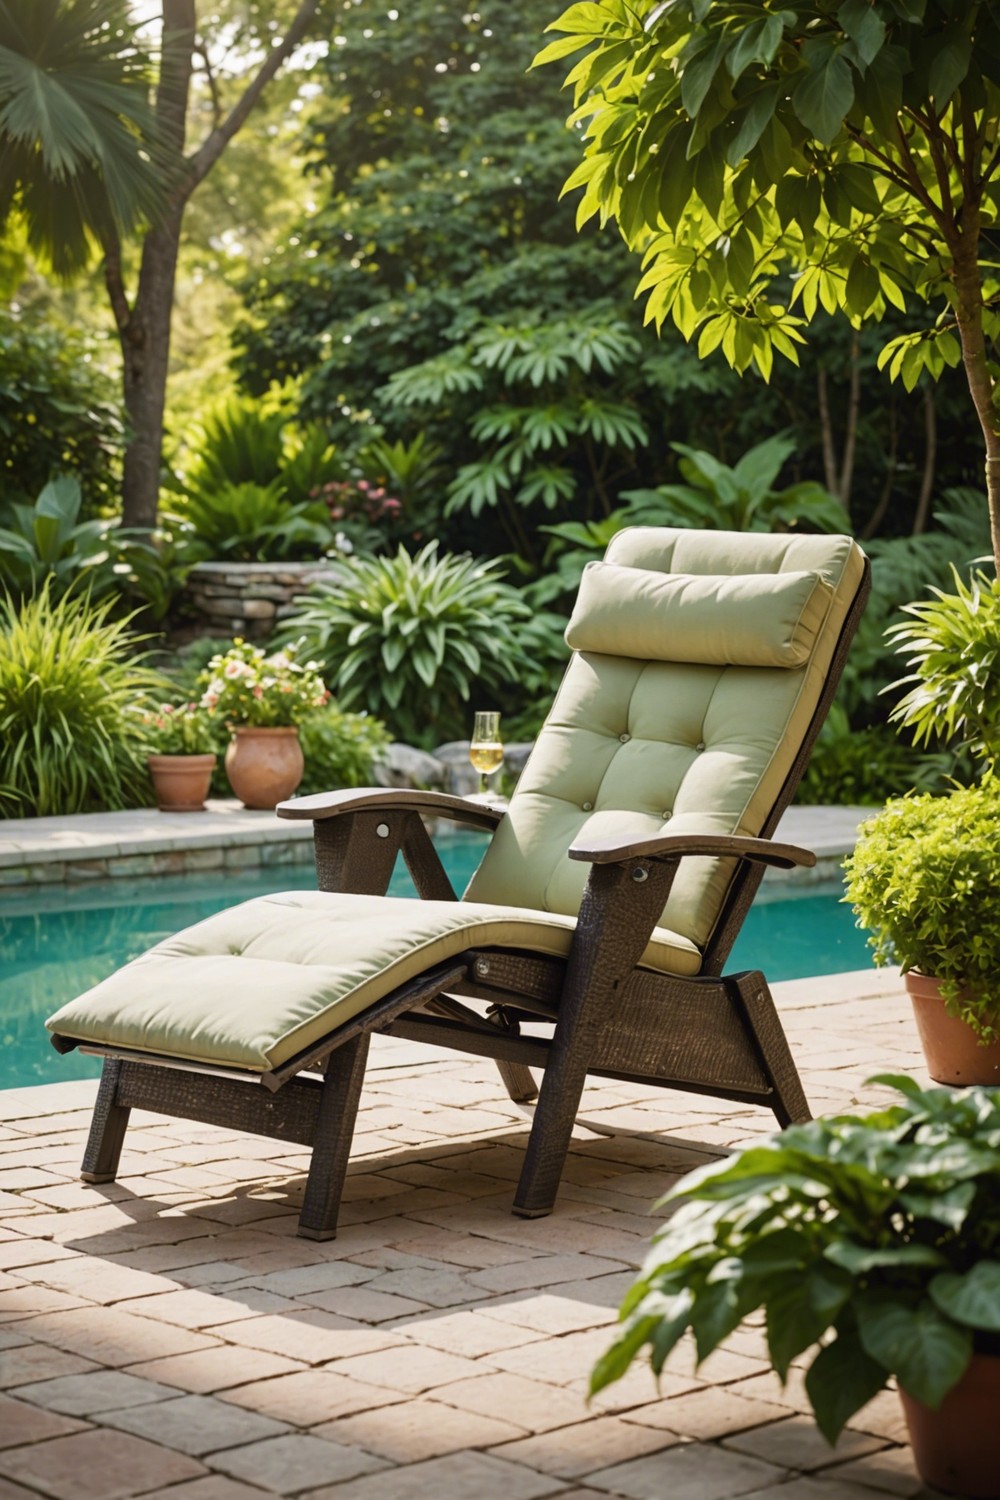 Reclining Patio Chairs for a Lazy Day